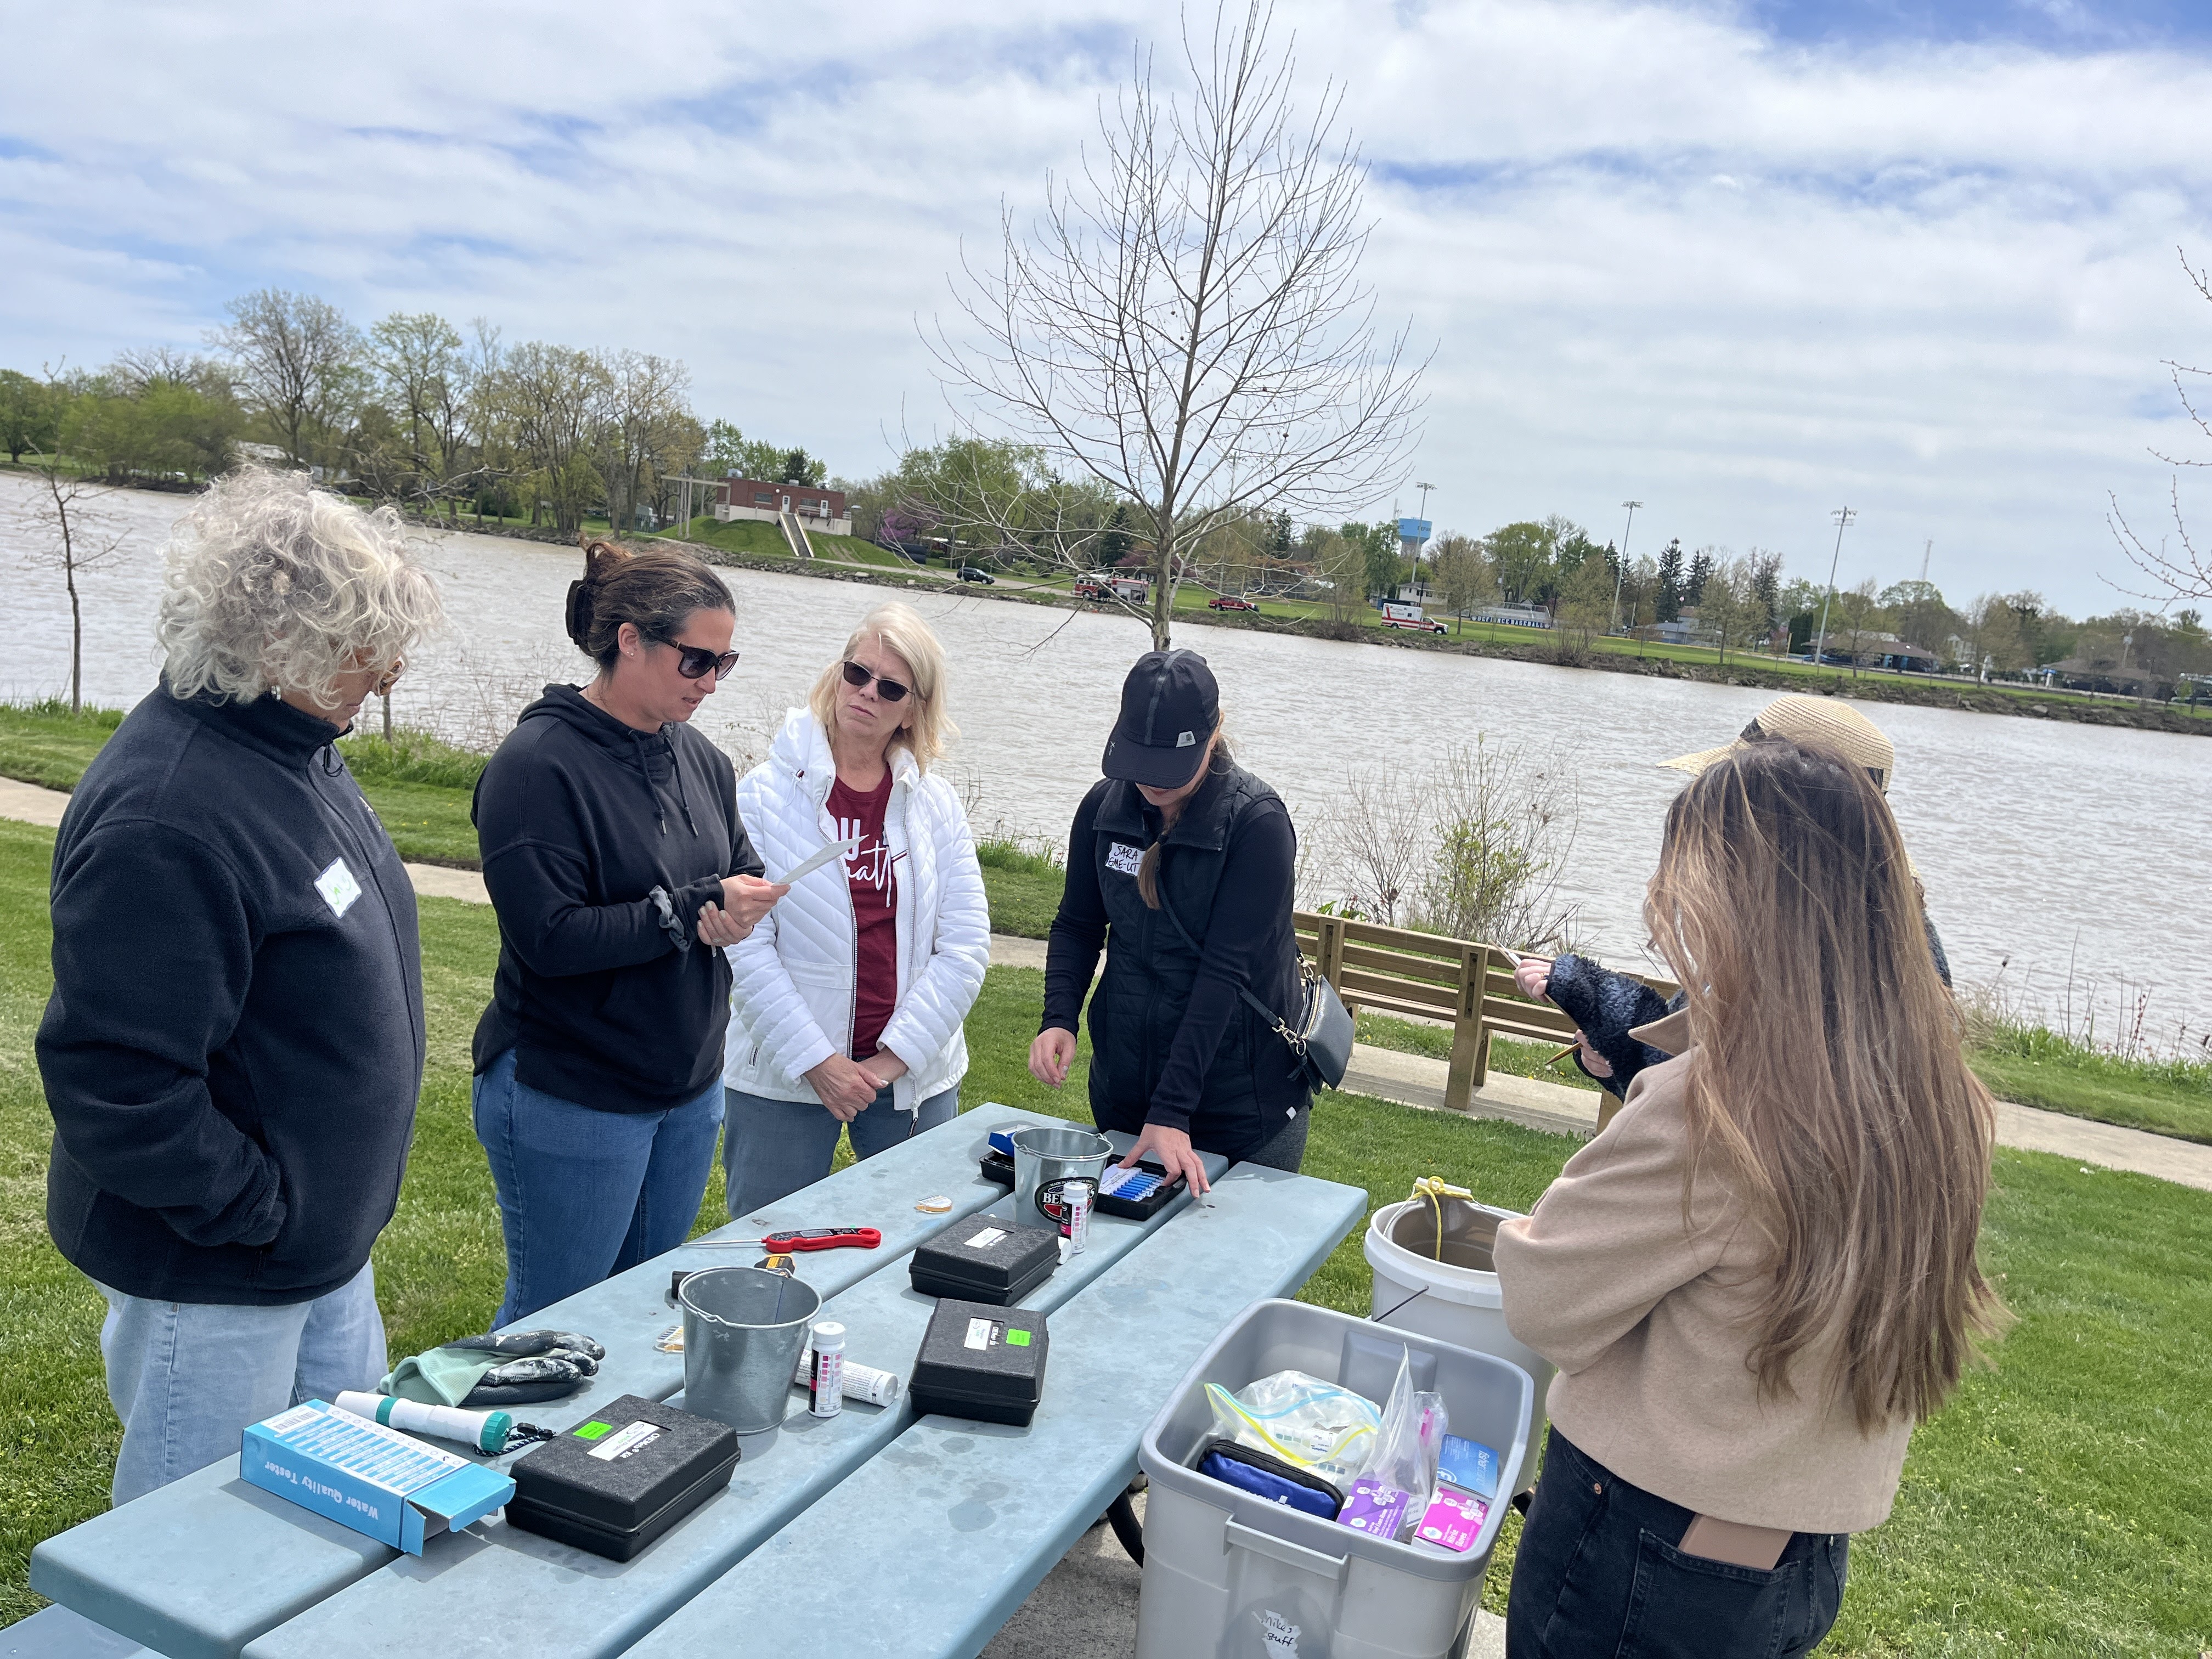 NARM participants stand around a picnic table with various water quality testing kits